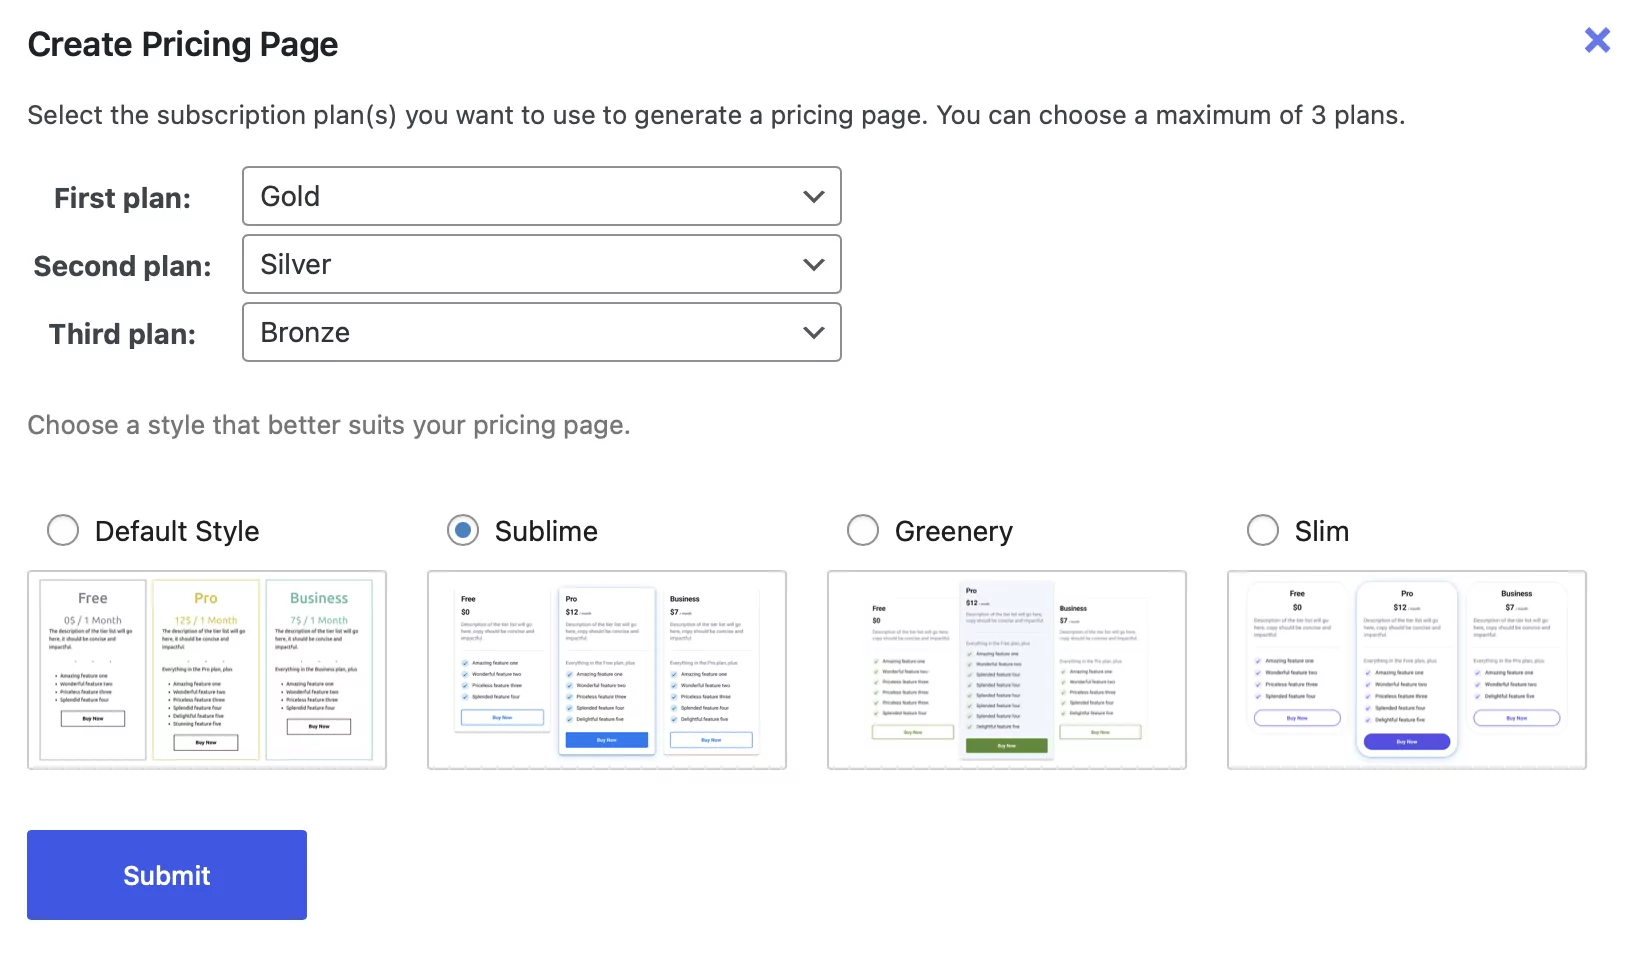 Create a pricing page